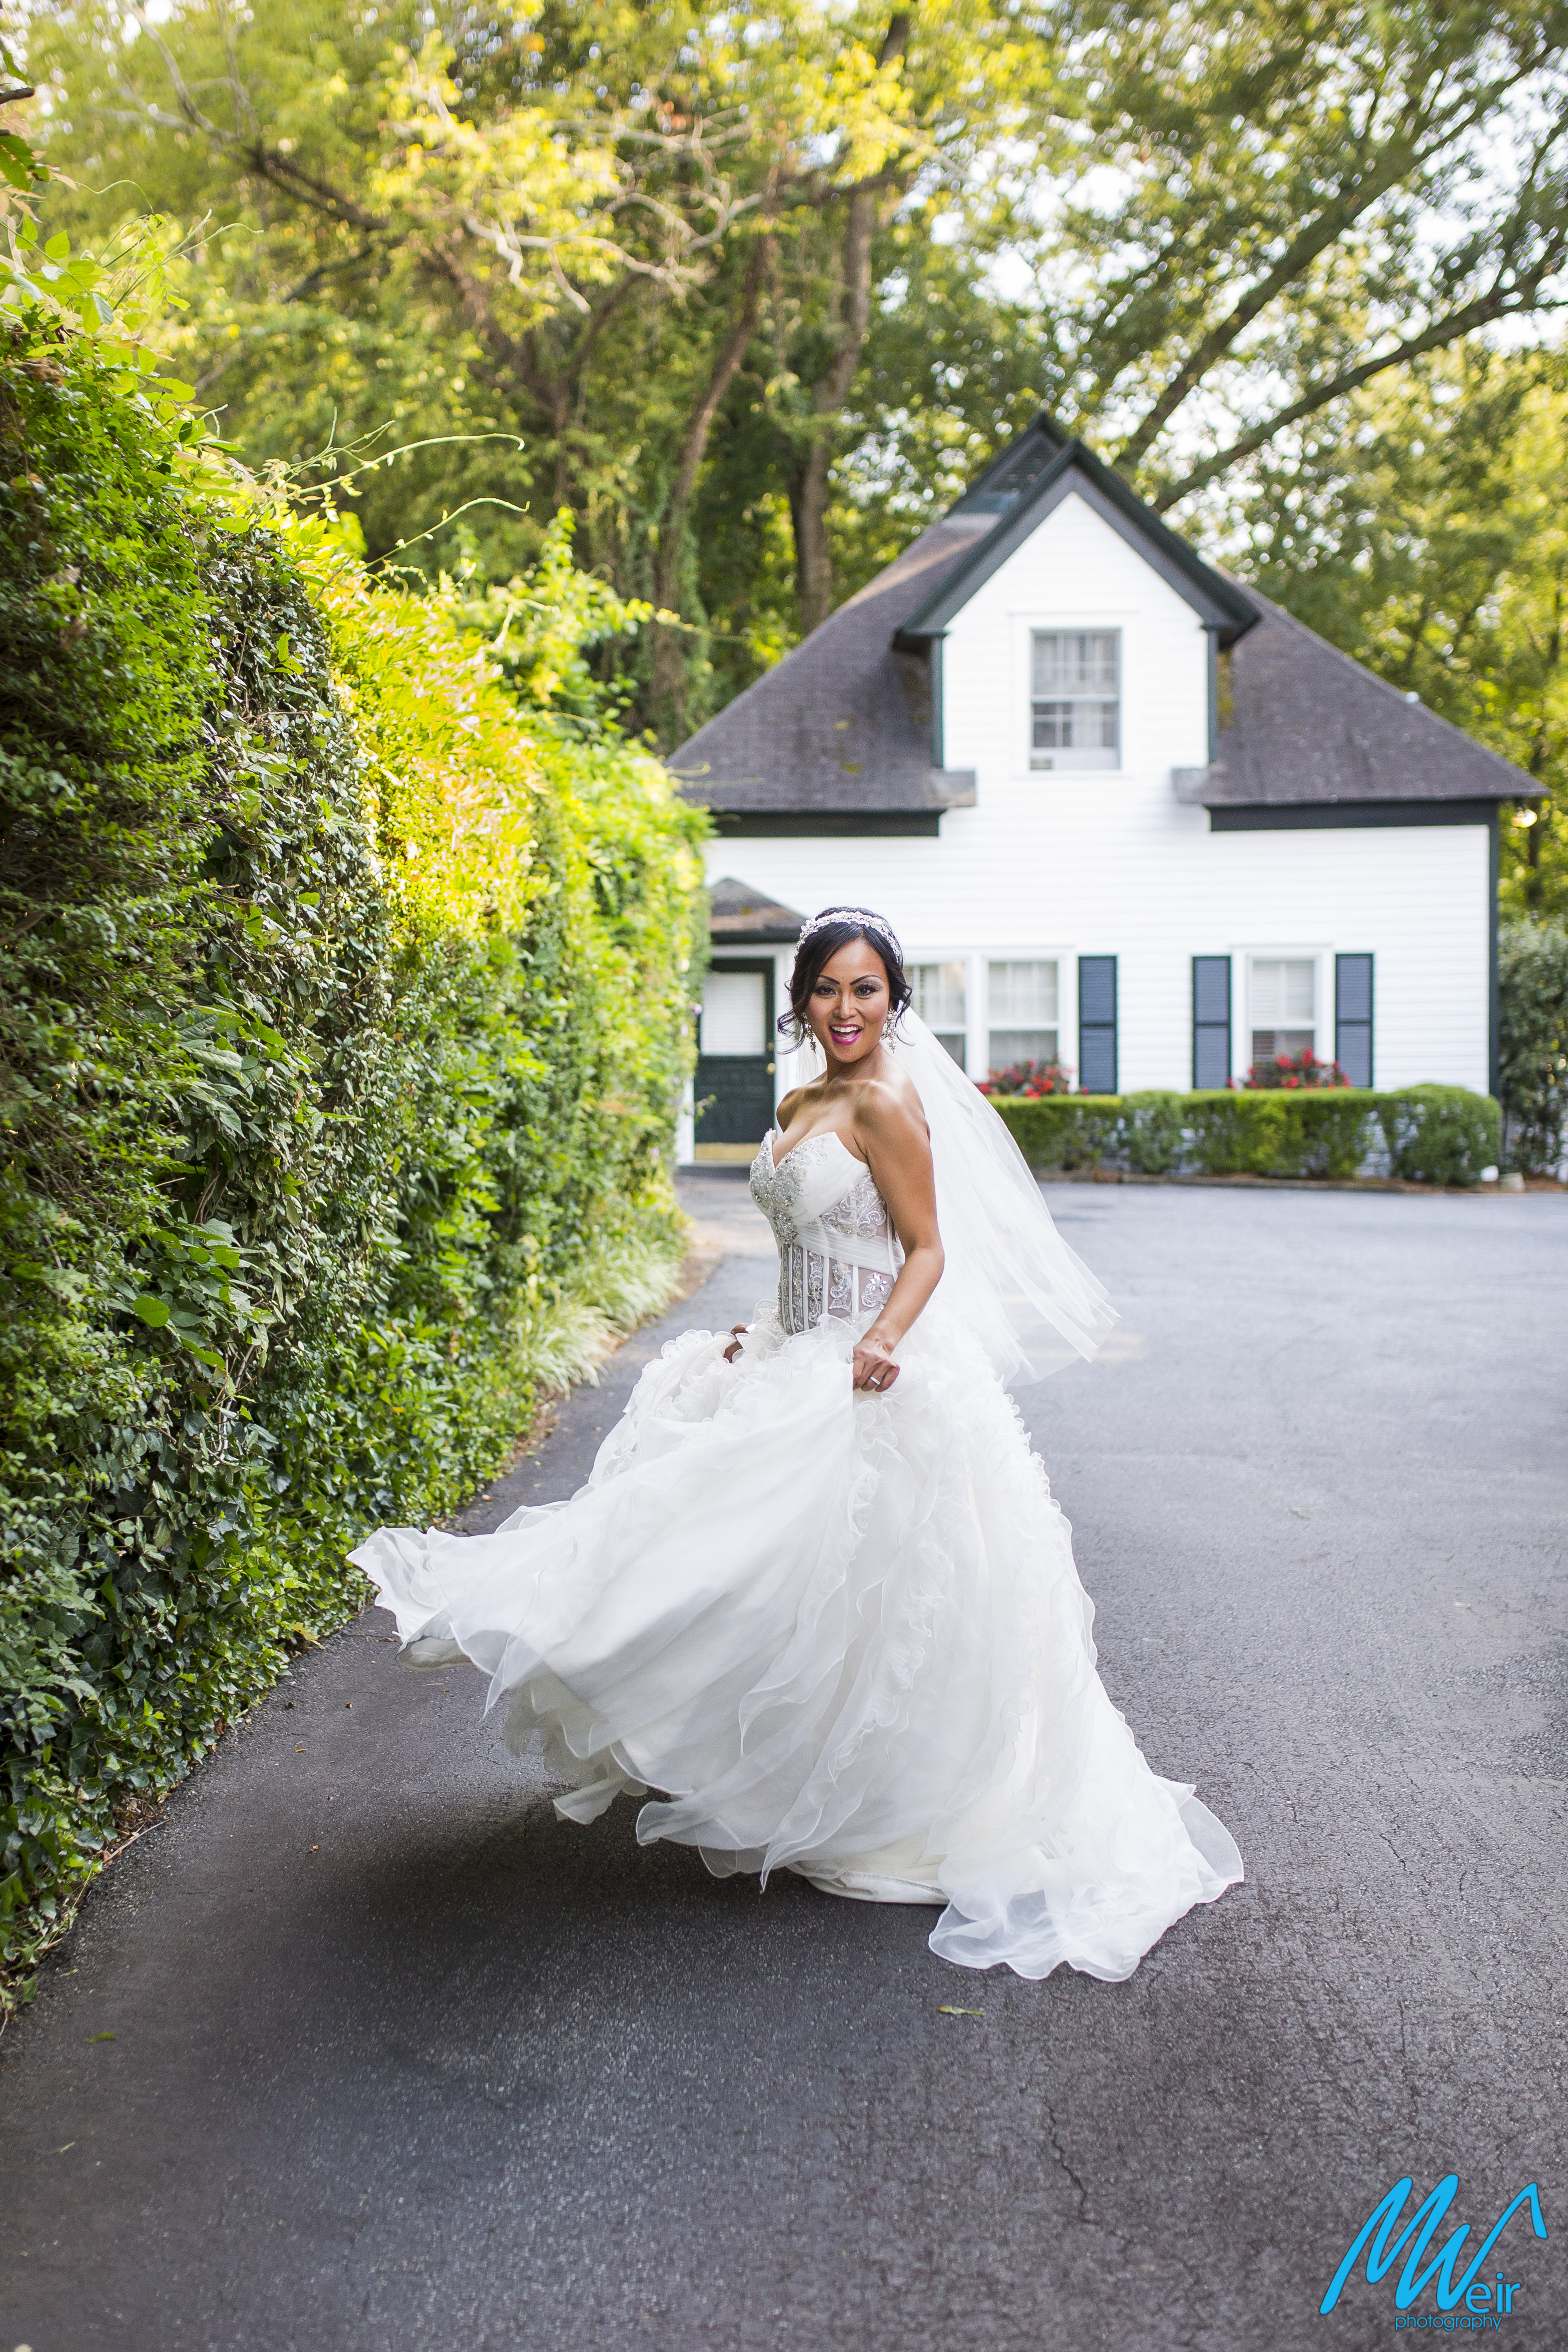 bride twirling her dress in front of cute cottage next to hedge